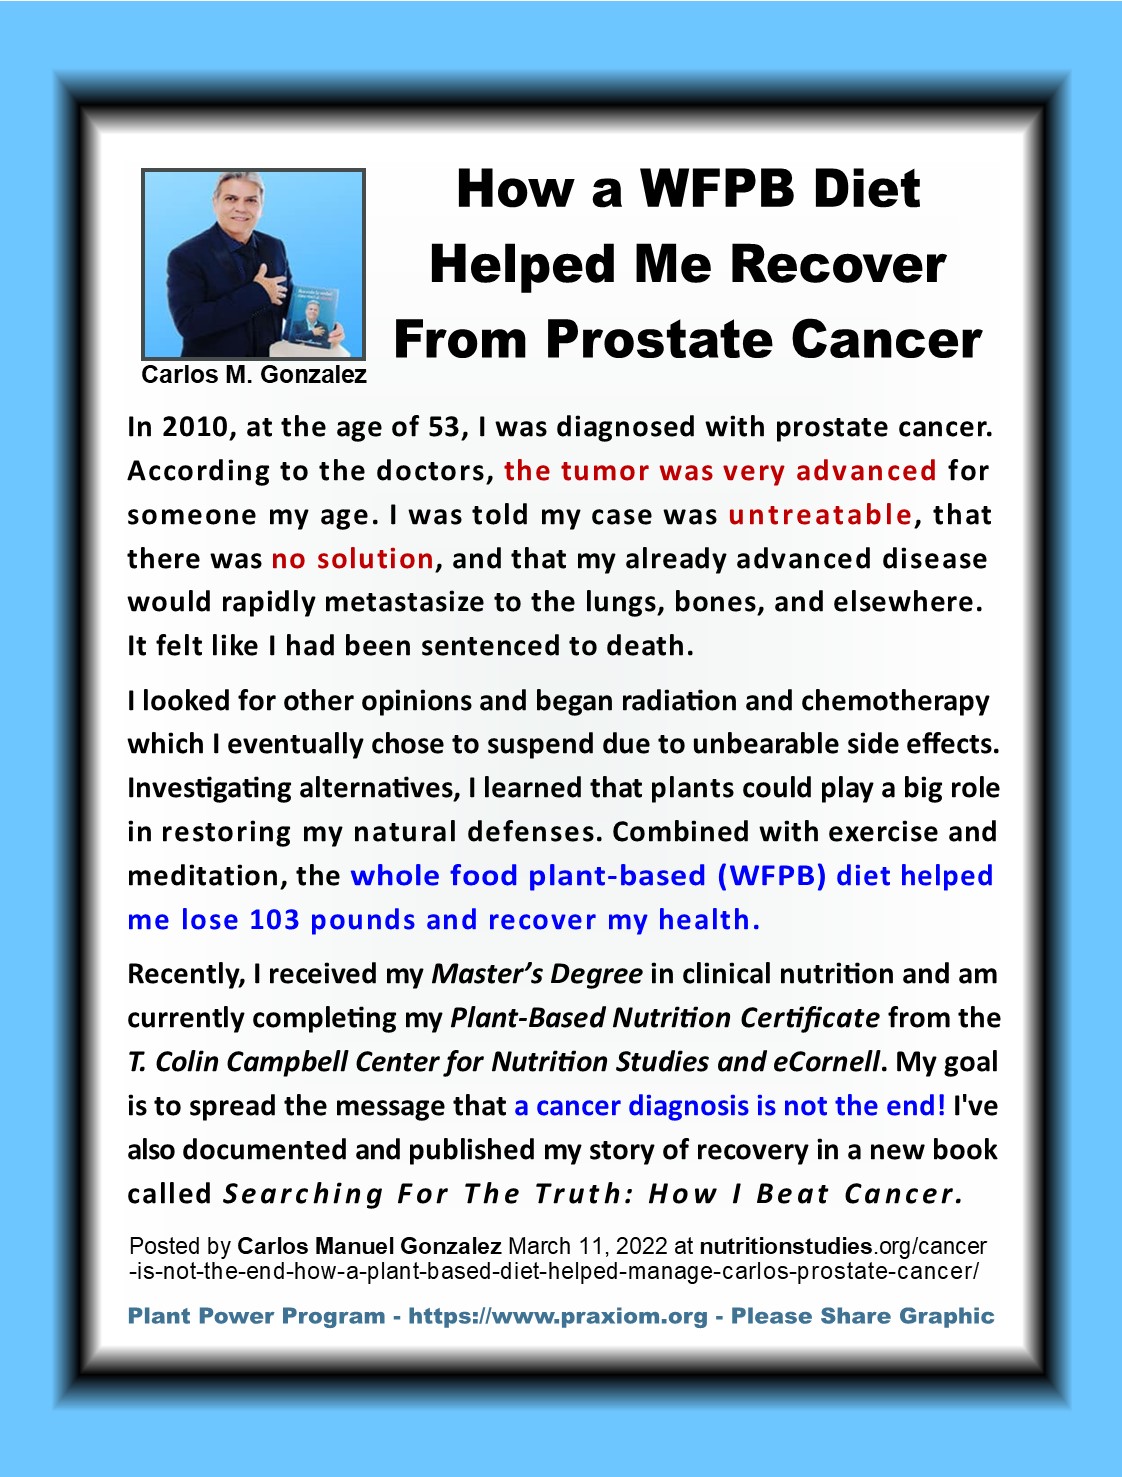 How a WFPB Diet Helped Me Recover From Prostate Cancer - Carlos Manuel Gonzalez 